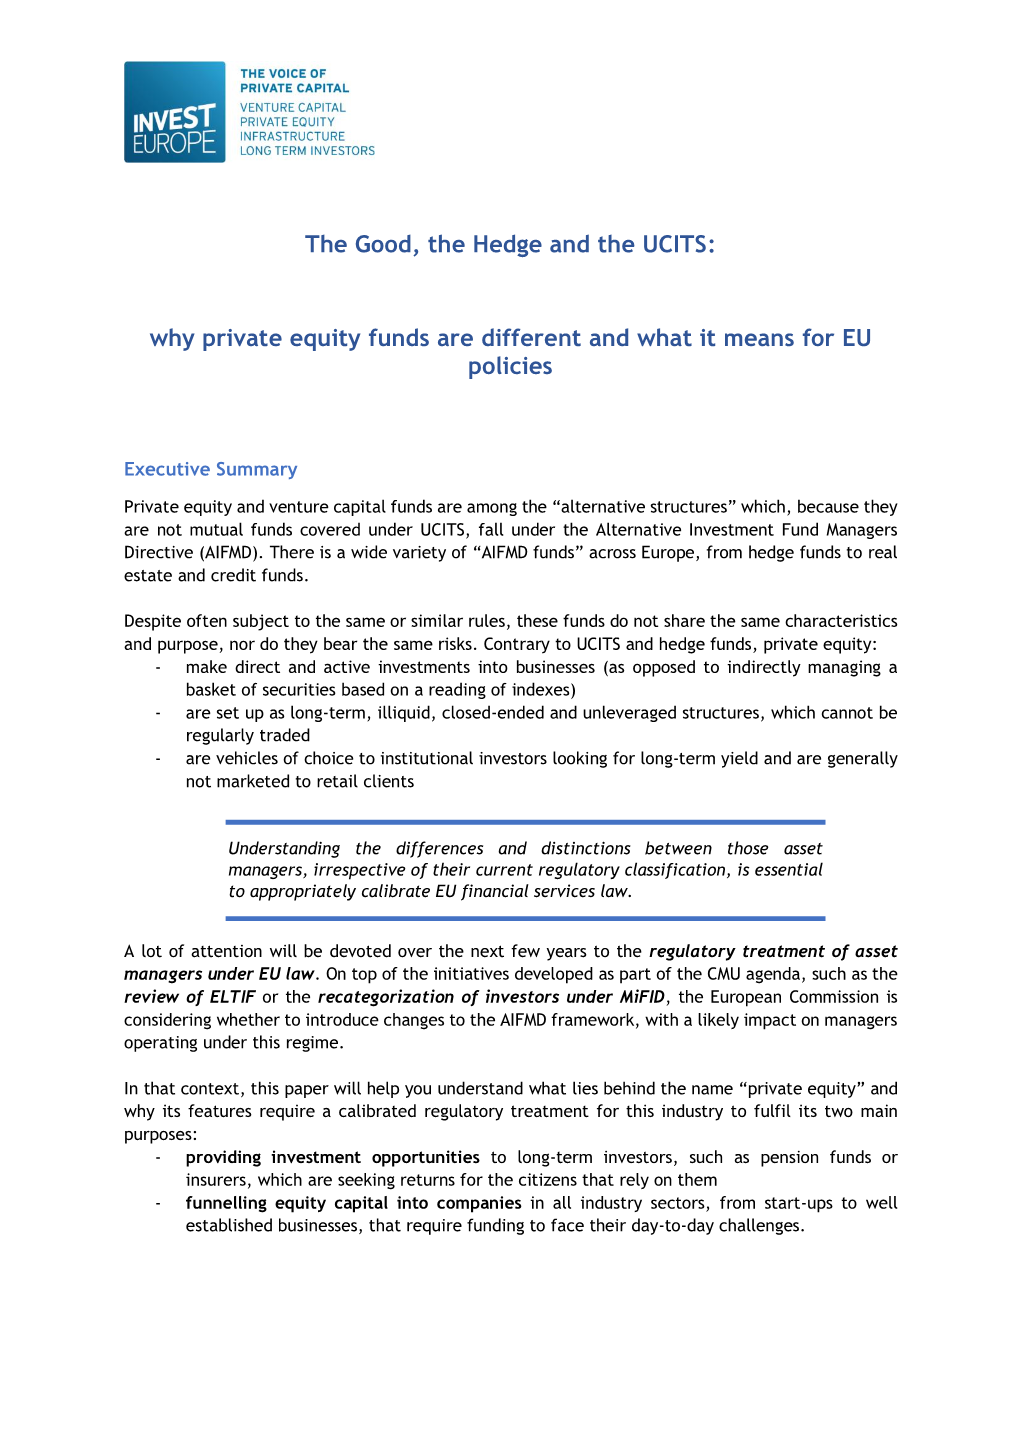 The Good, the Hedge and the UCITS: Why Private Equity Funds Are